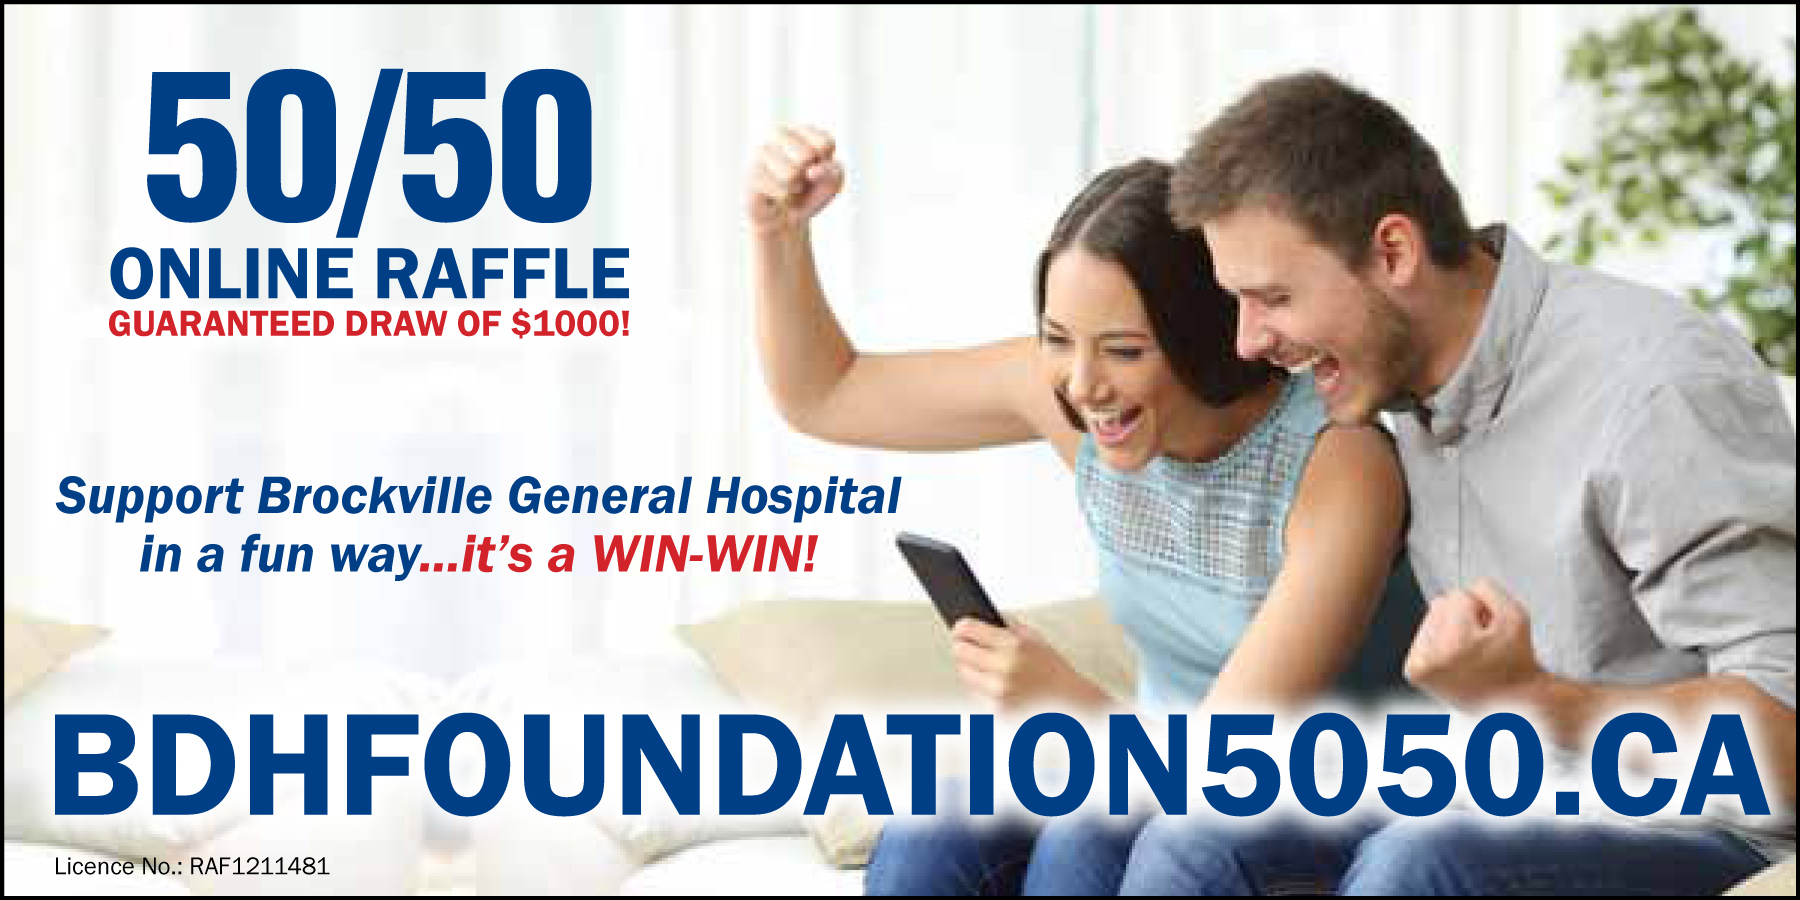 THE BROCKVILLE AND DISTRICT HOSPITAL FOUNDATION LAUNCHES ONLINE 50/50 DRAWS IN SUPPORT OF EQUIPMENT PURCHASES FOR   BROCKVILLE GENERAL HOSPITAL 